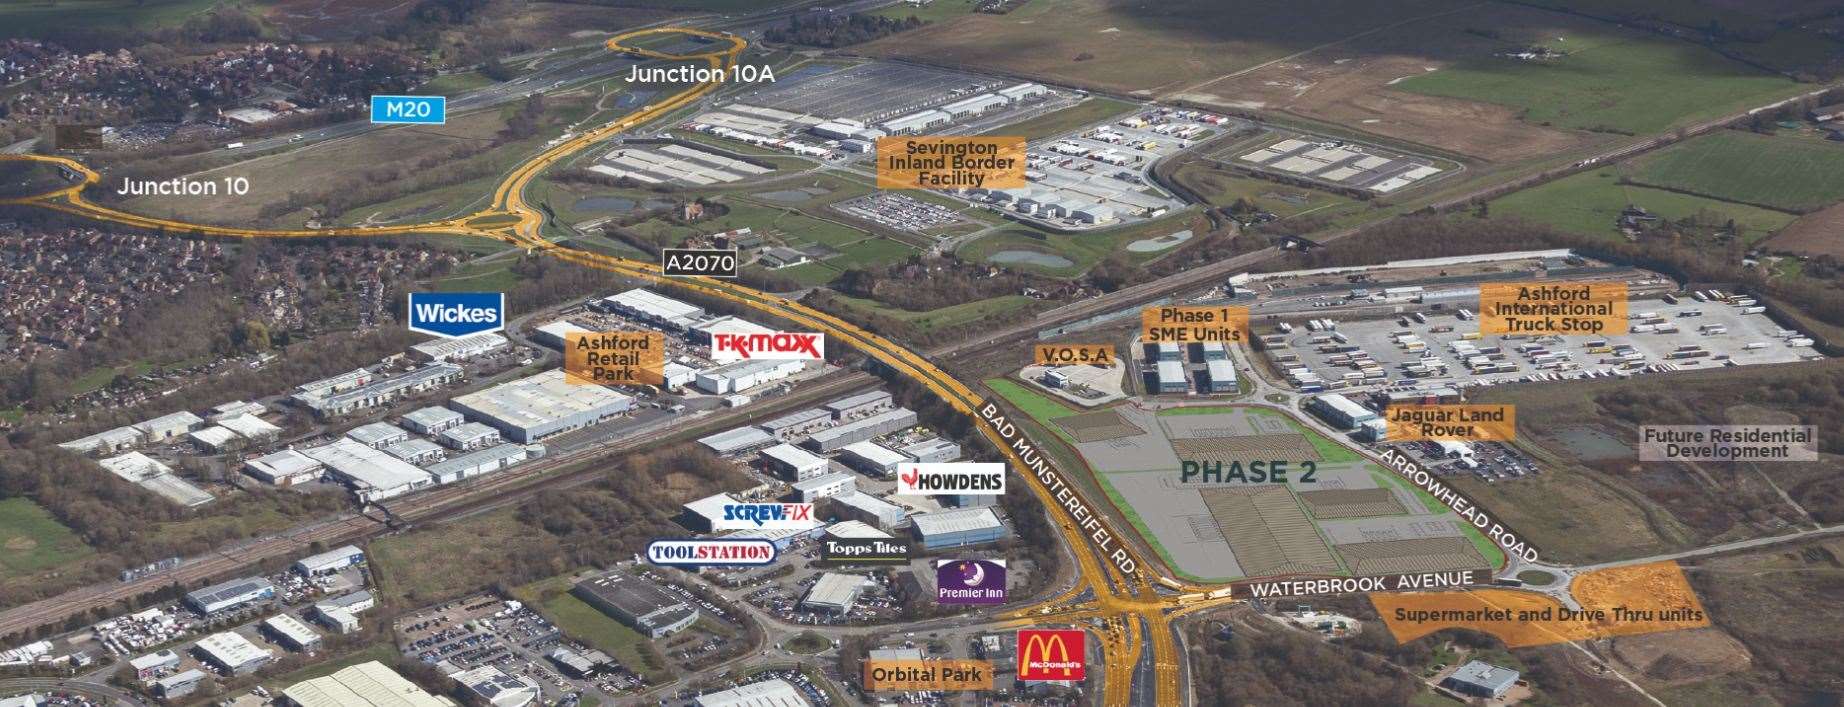 The Waterbrook Park site sits close to Junction 10a of the M20. The ‘phase two’ label shows where the Amazon warehouse was due to go. Picture: GSE Group